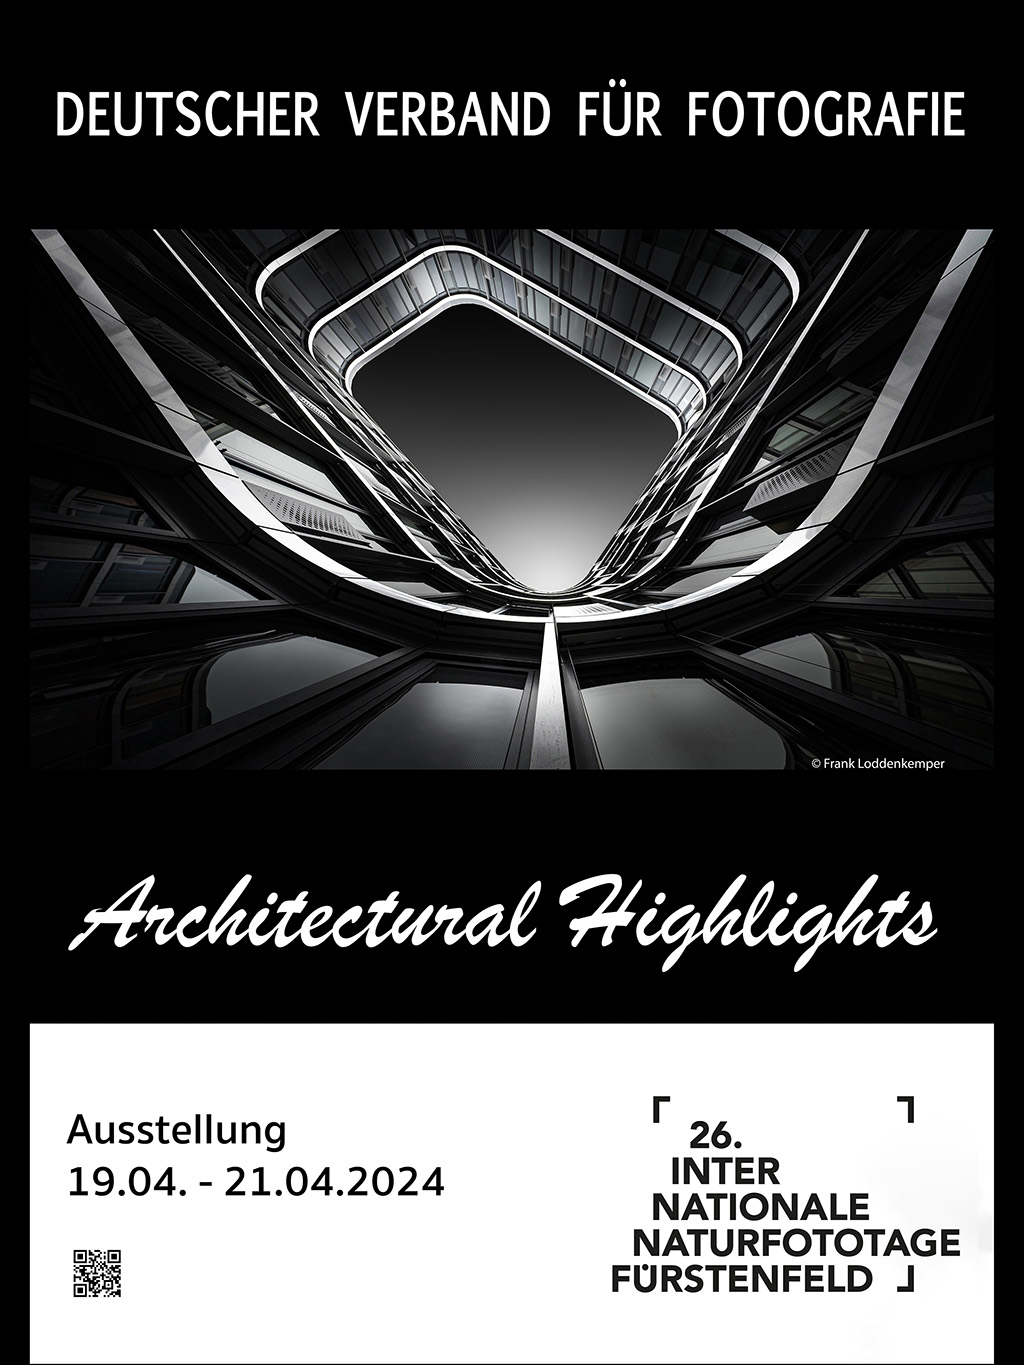 Architectural Highlights